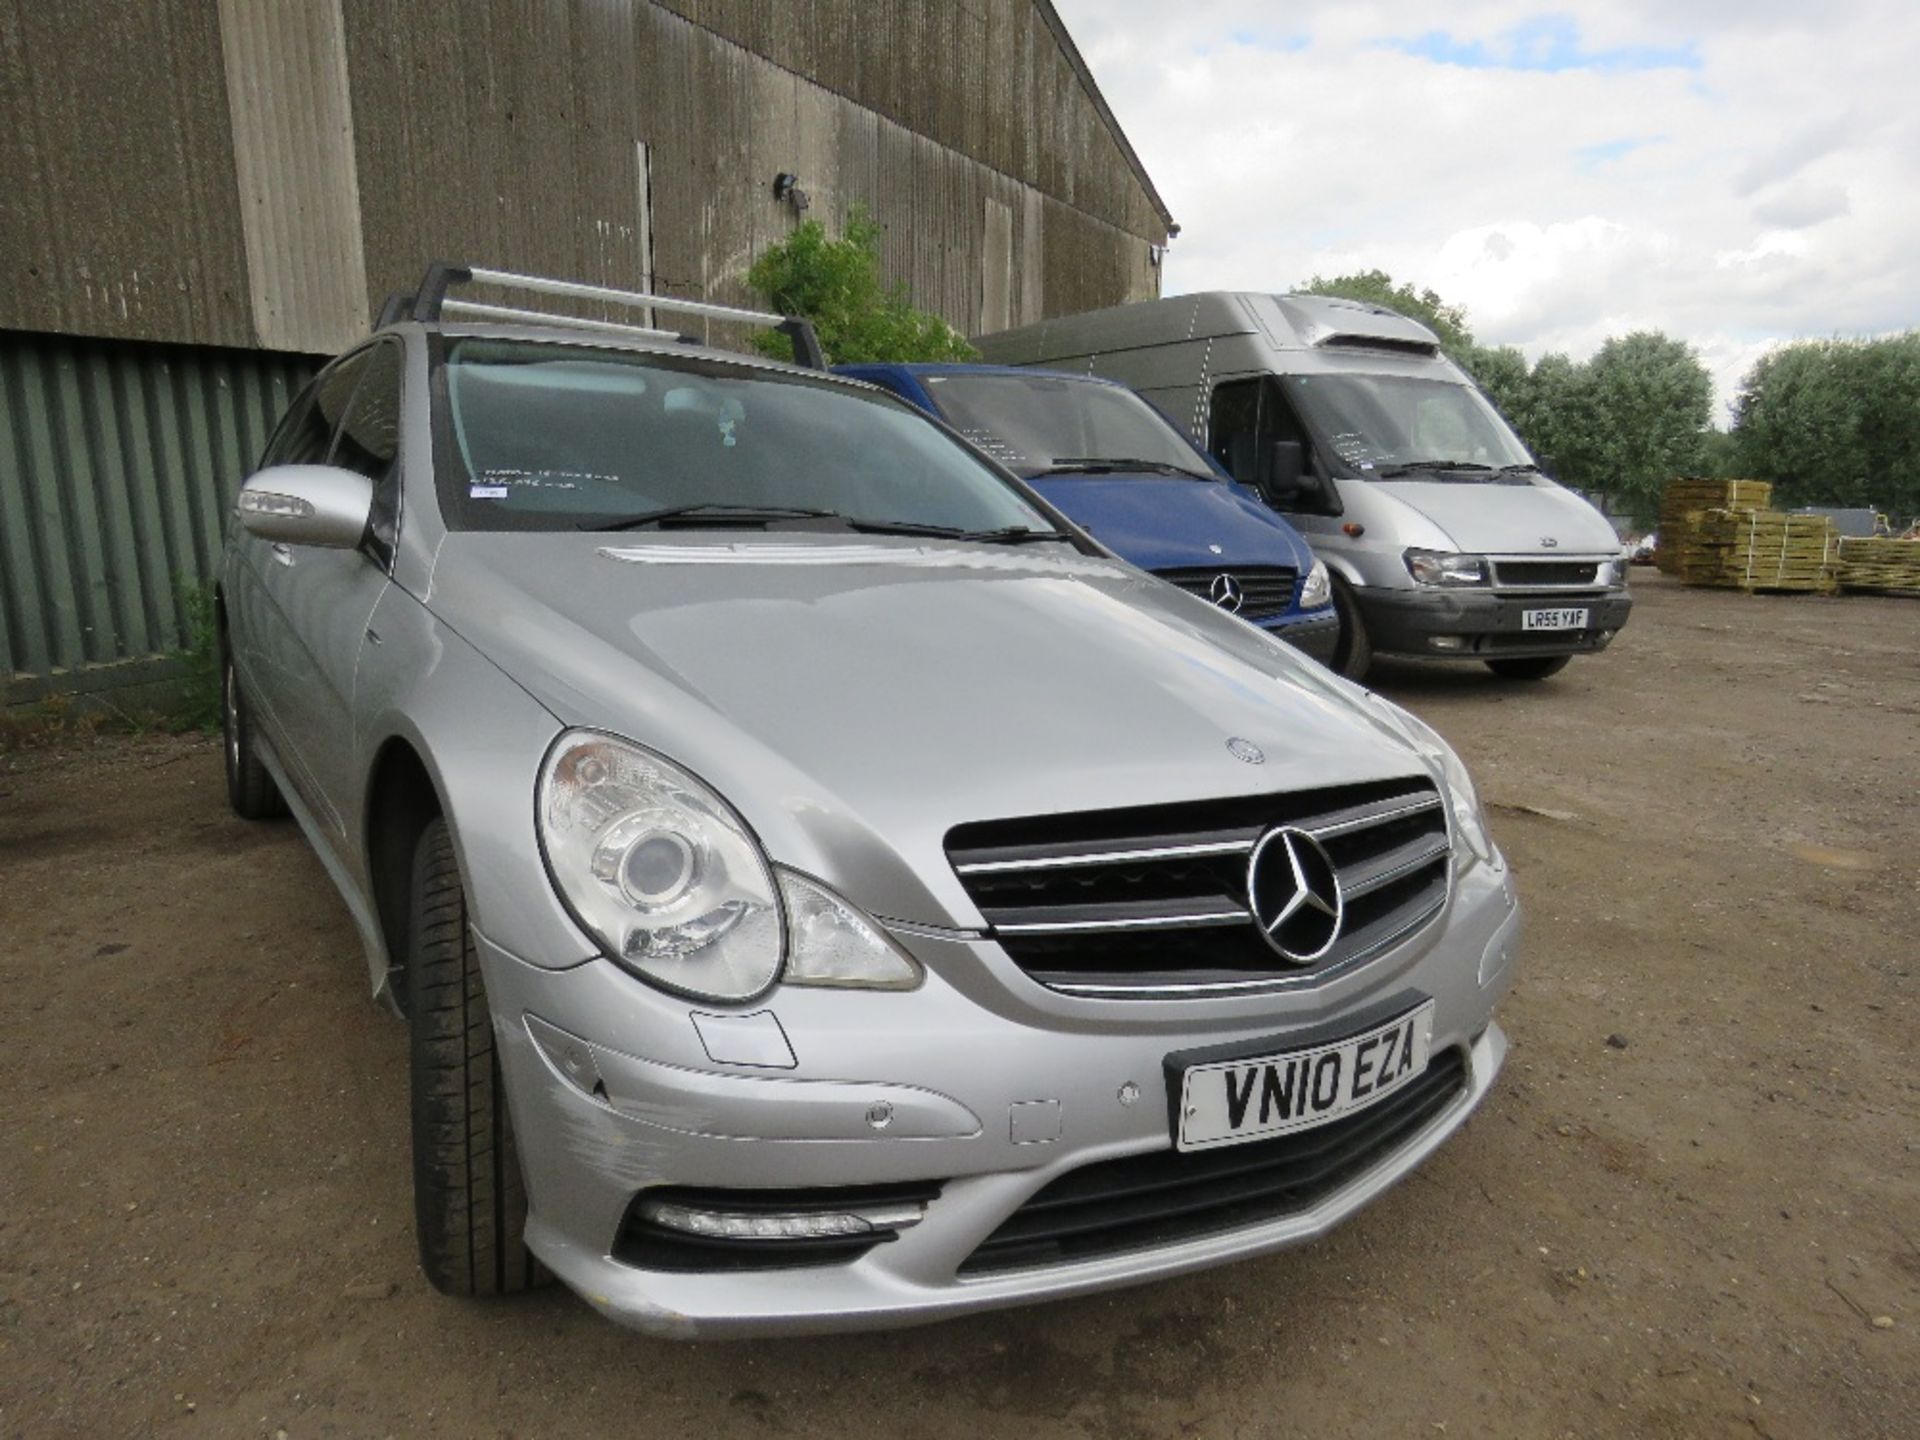 MERCEDES R350CDI 7 SEATER CAR REG:VN10 EZA. 128,098 REC MILES, 4MATIC GEARBOX. TESTED TILL 16/10/20